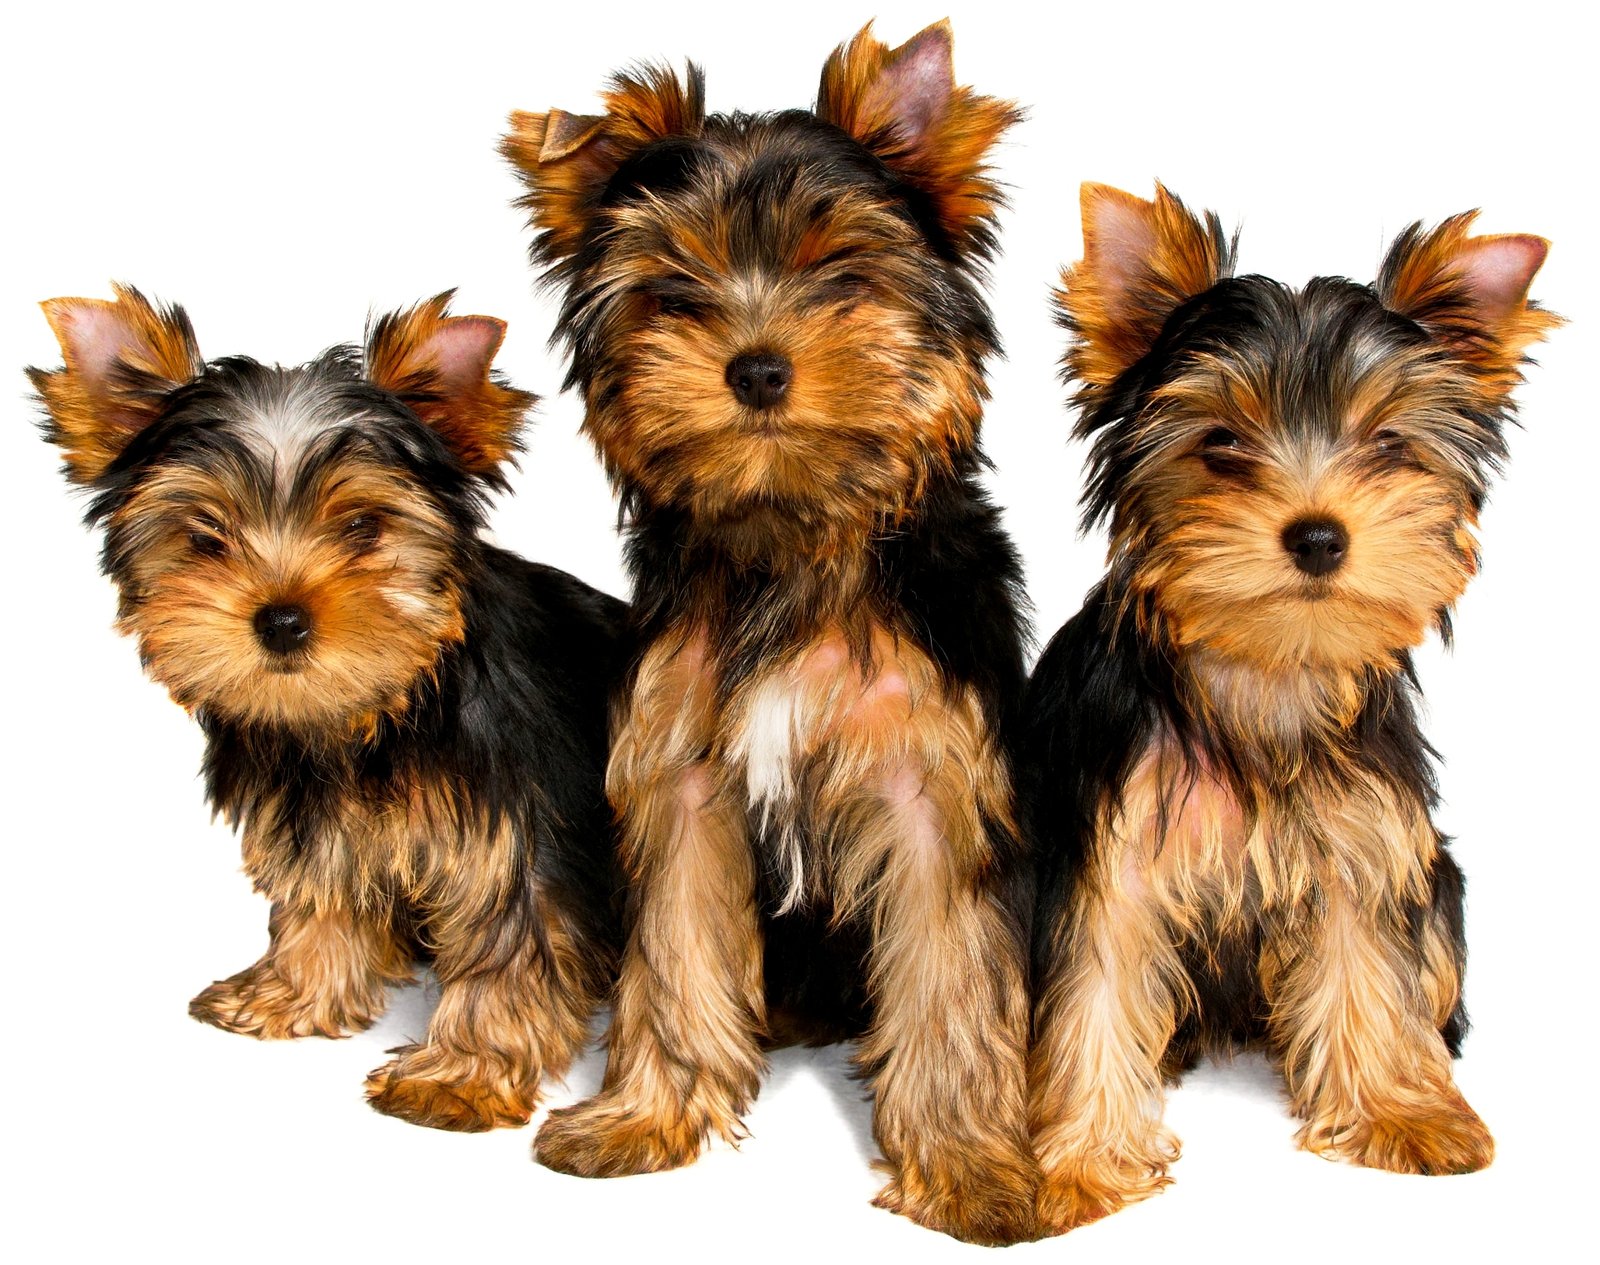 6 Irresistibly Cute Types of Yorkshire Terriers